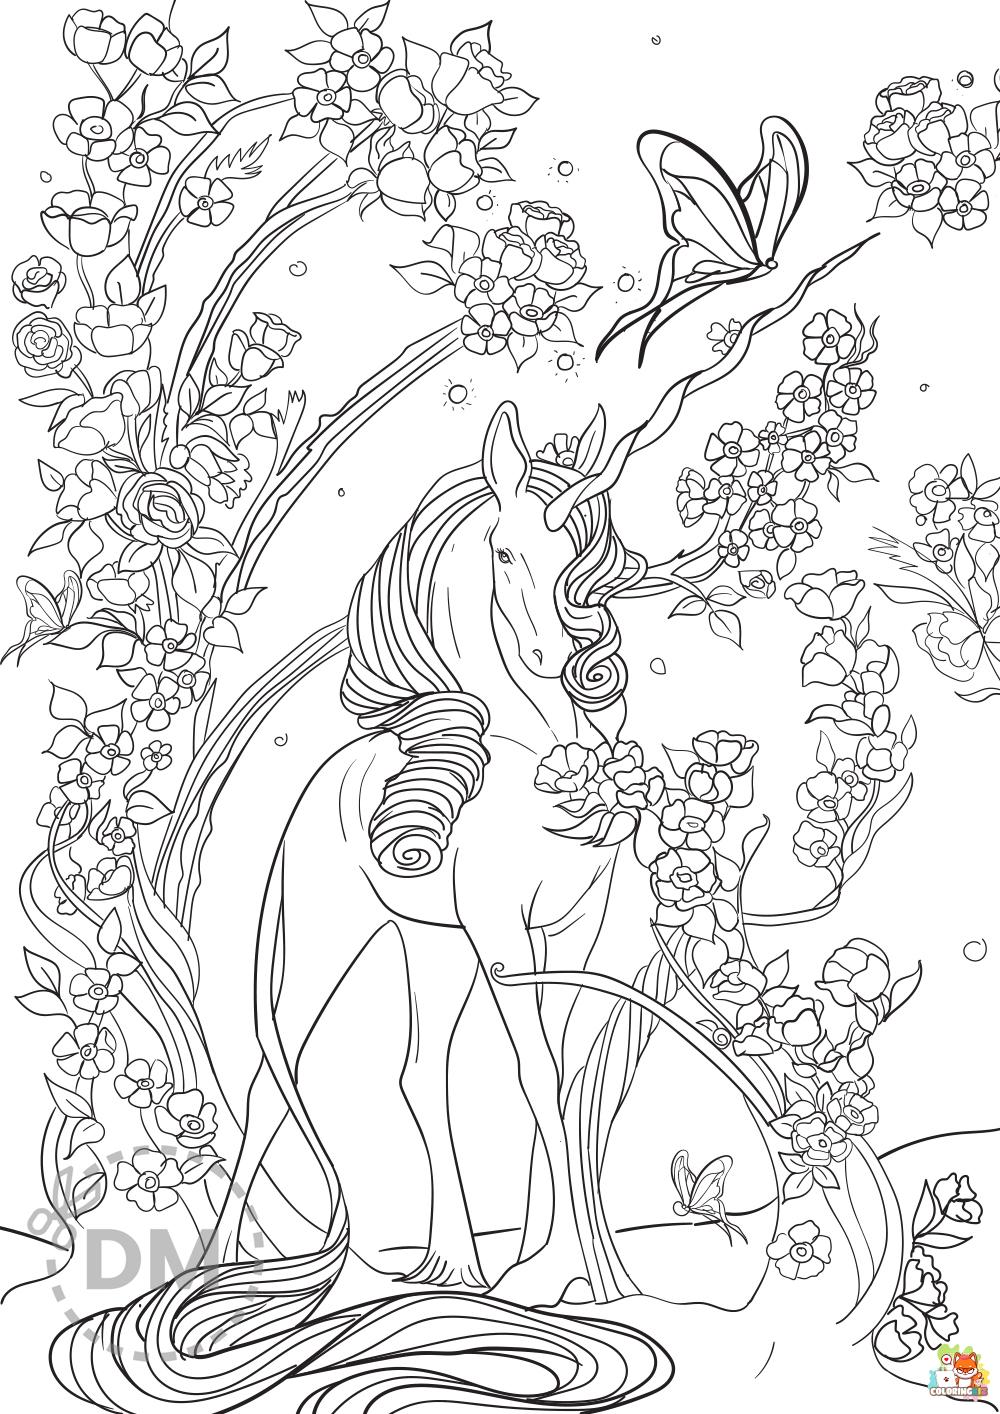 Unicorn In The Forest Coloring Pages 2